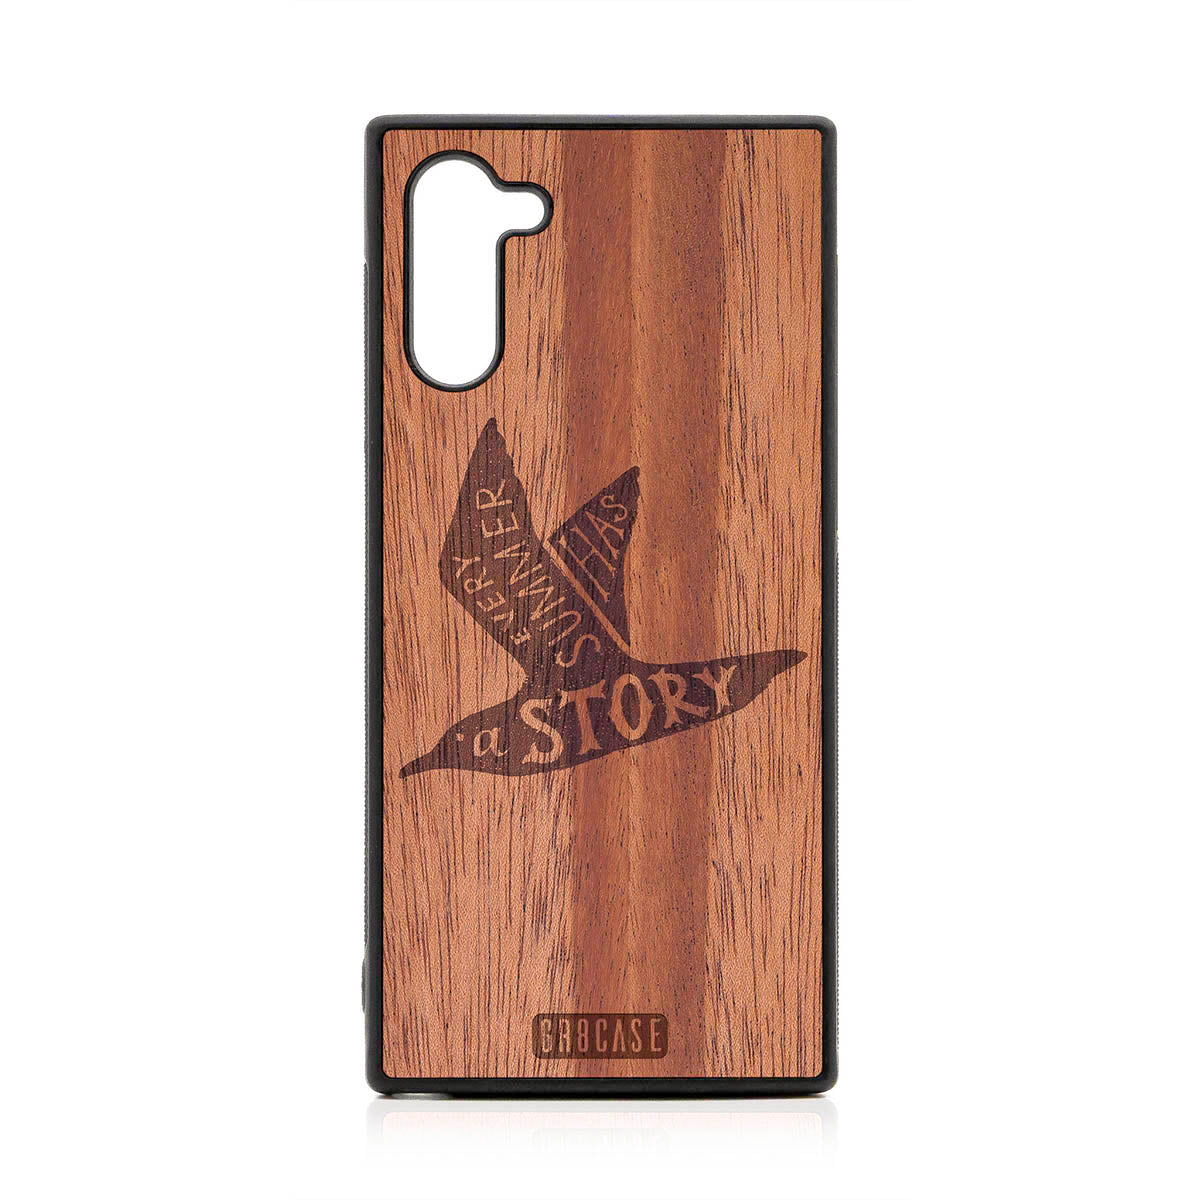 Every Summer Has A Story (Seagull) Design Wood Case For Samsung Galaxy Note 10